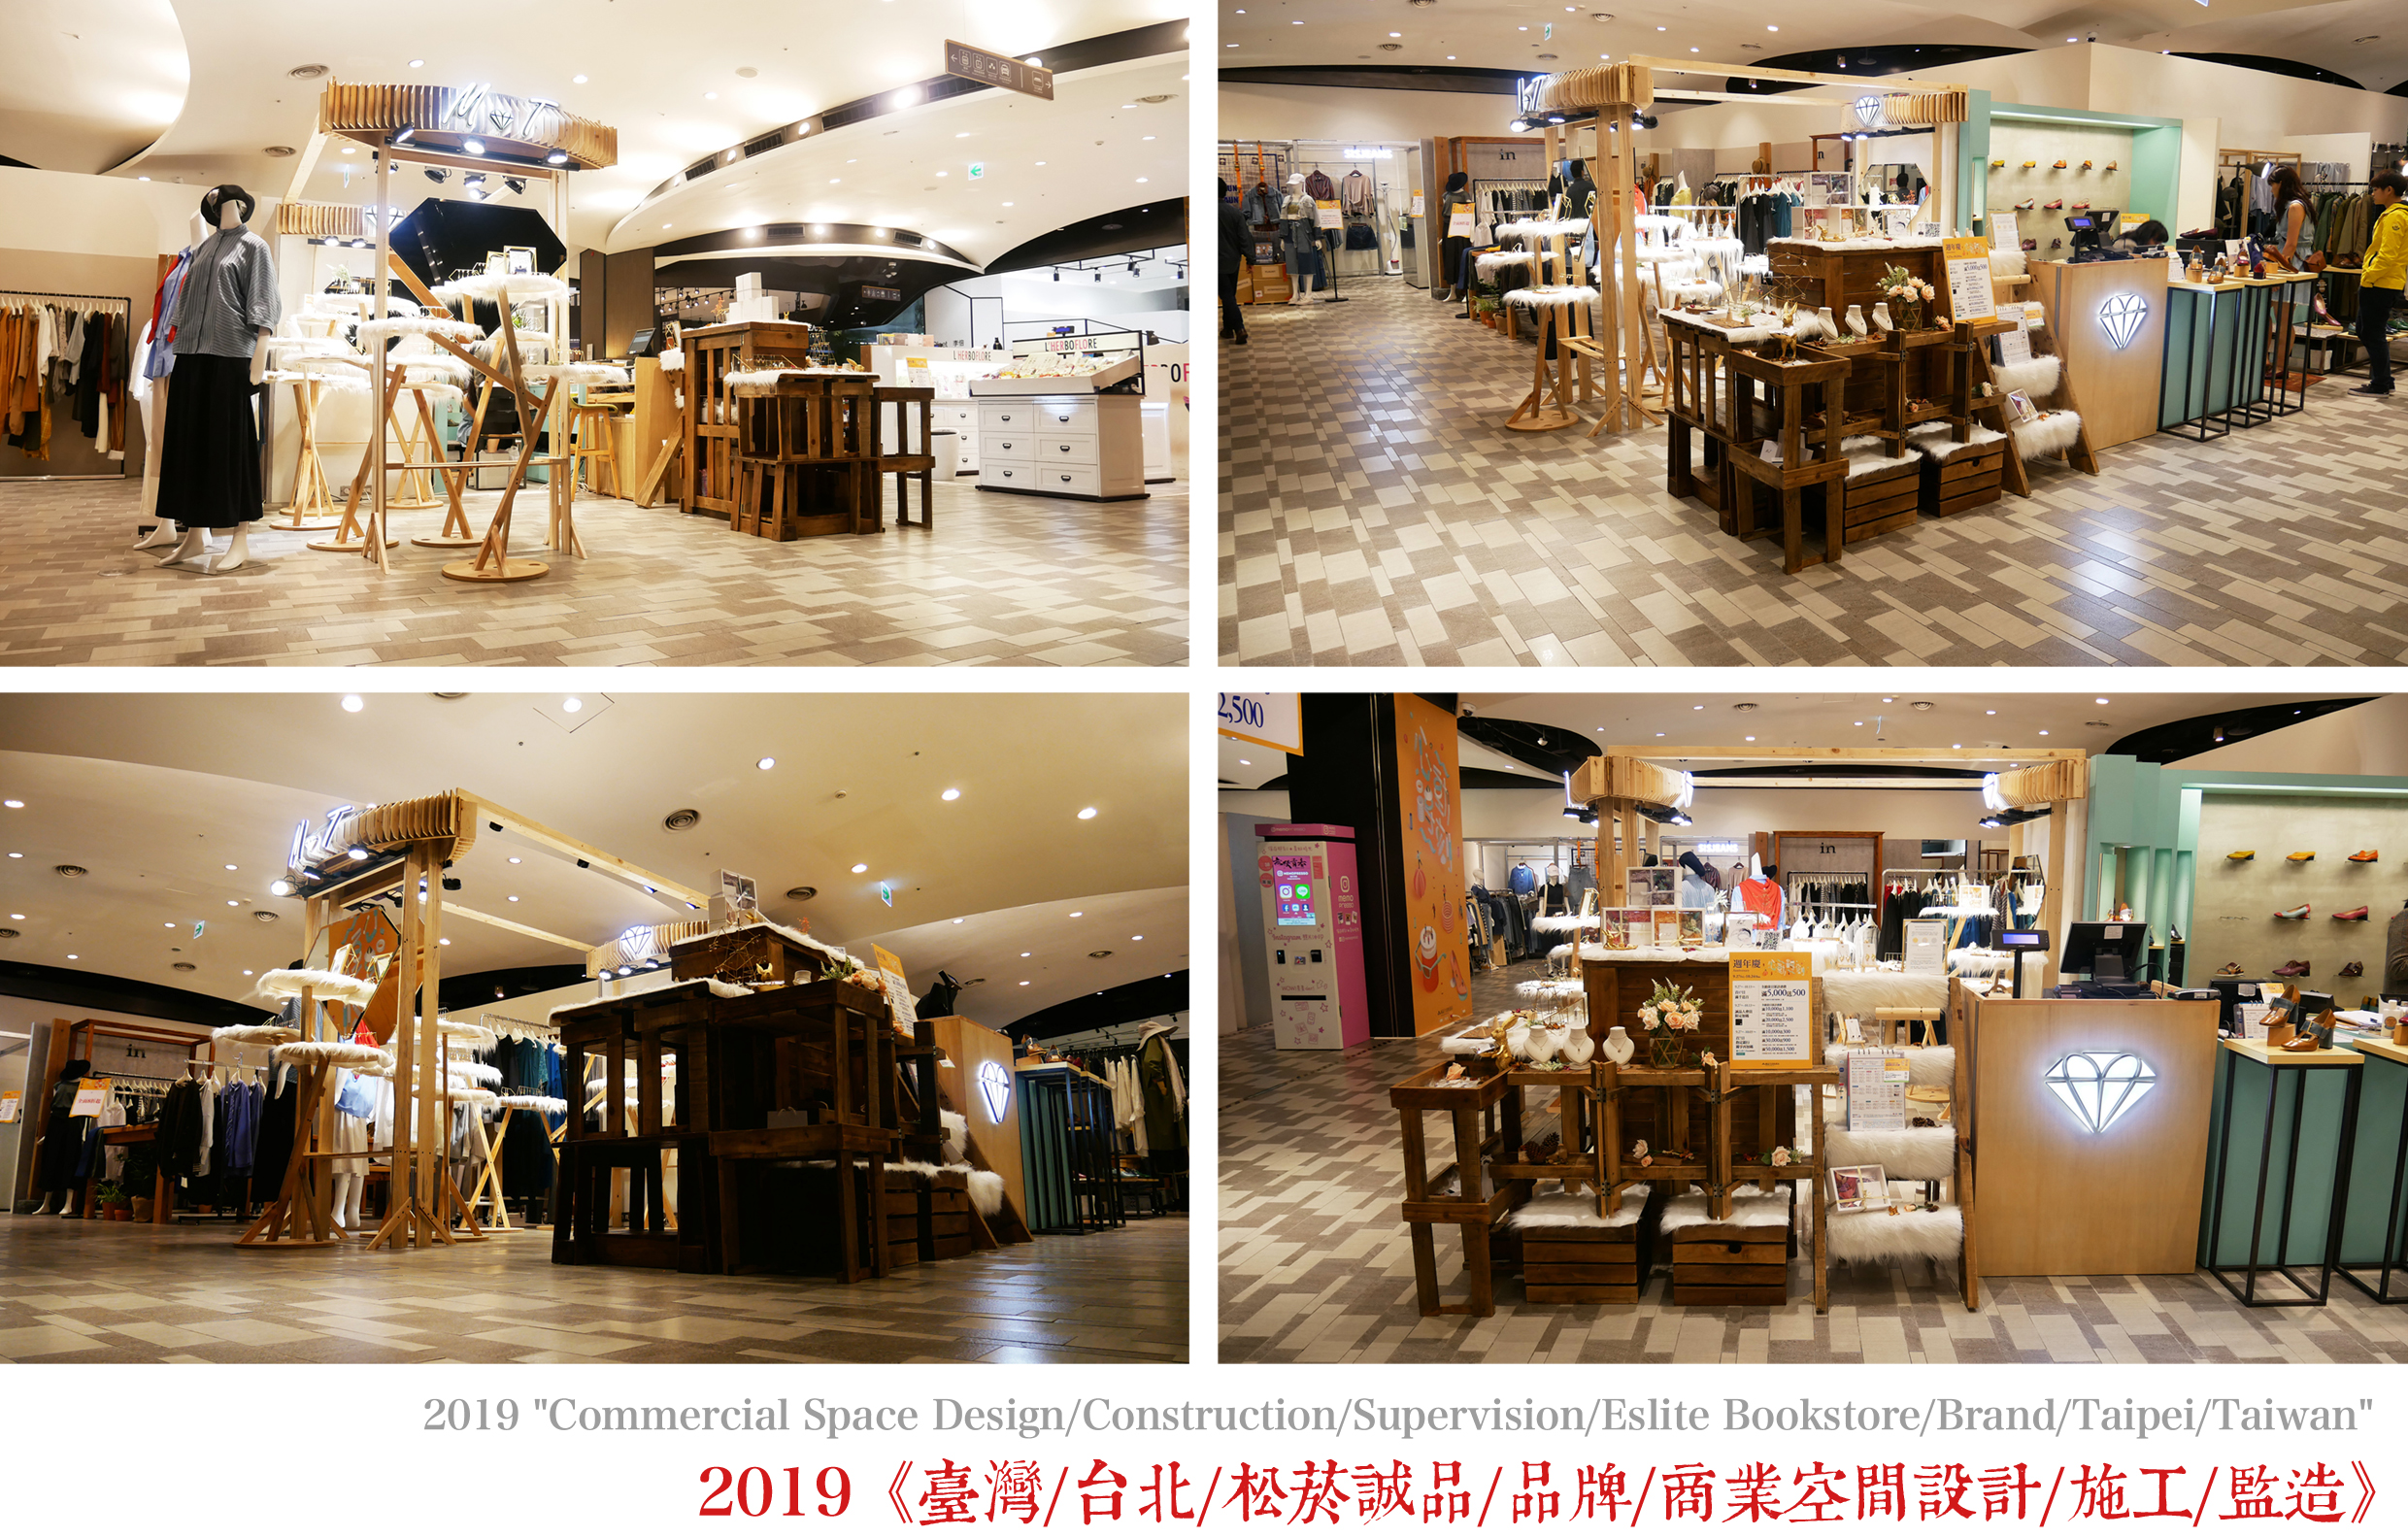 2019 "Commercial Space Design/Construction/Supervision/Eslite Bookstore/Brand/Taipei/Taiwan"2019《臺灣/台北/松菸誠品/品牌/商業空間設計/施工/監造》【Just Jump Culture all rights reserved子丑文創/版權所有】